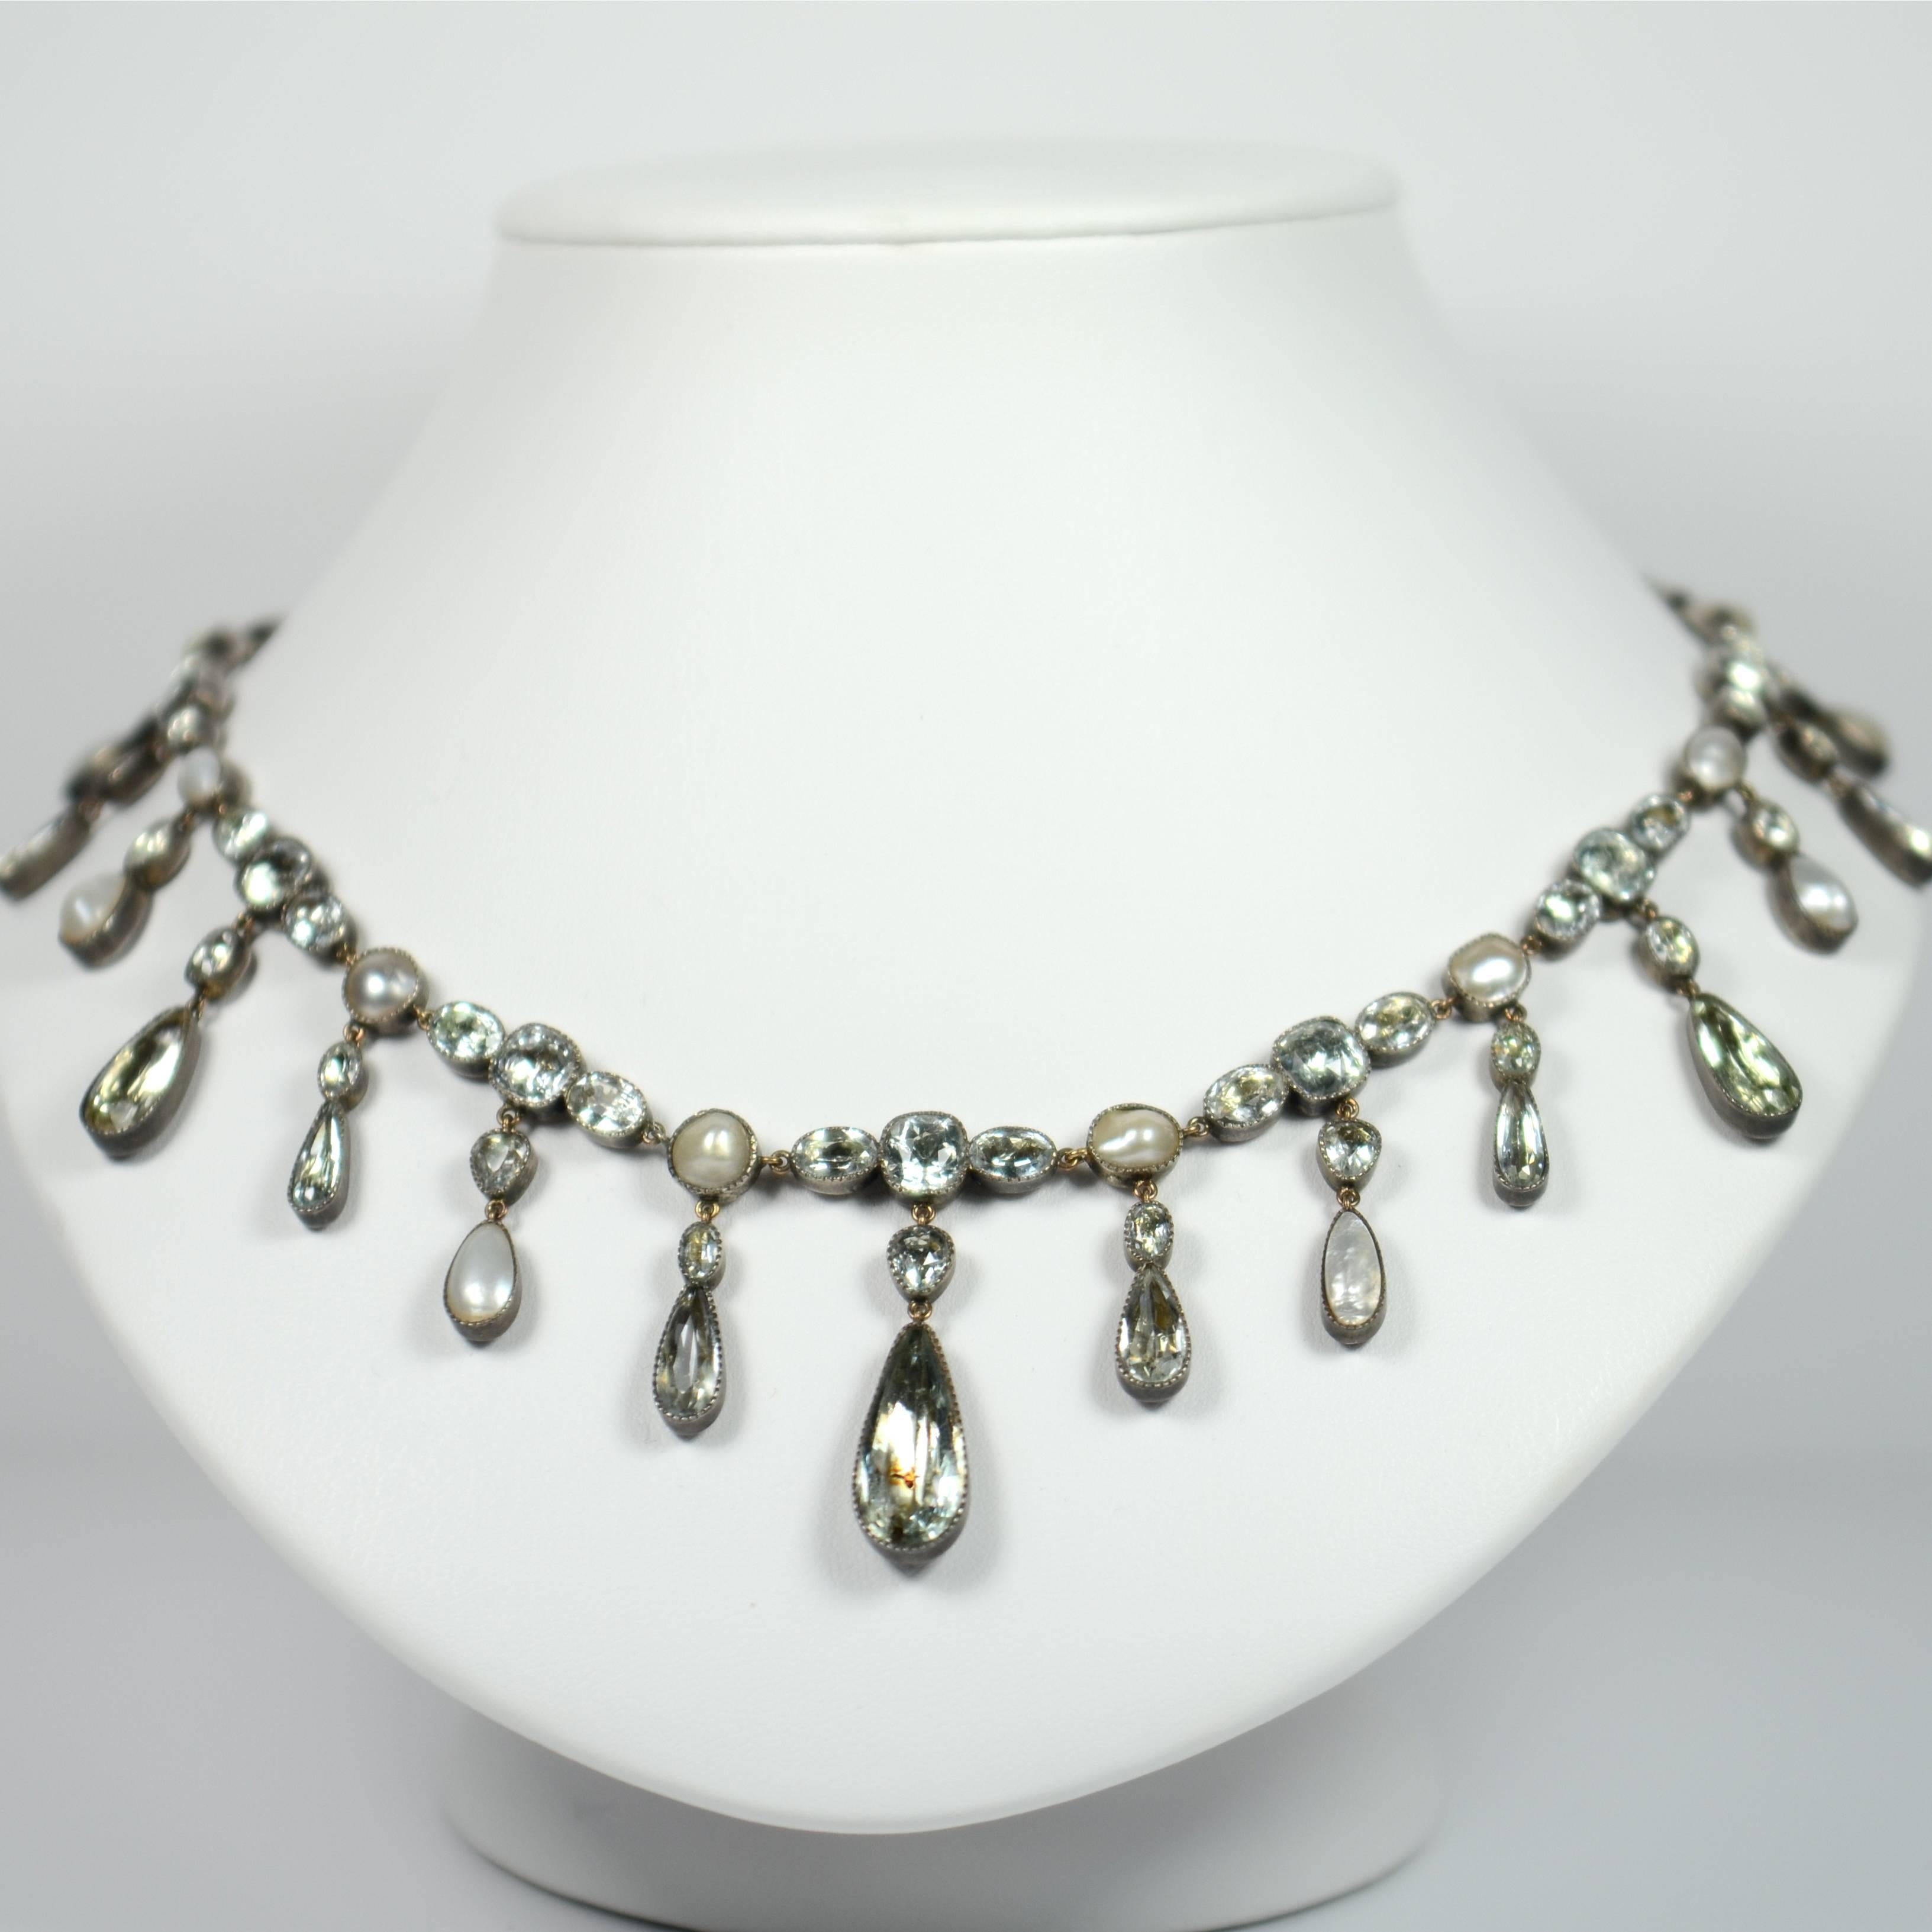 A rare and extremely pretty Georgian fringe riviere necklace with 63 foiled aquamarines and 18 blister pearls millegrain set to closed back silver mounts with a gold chain and toggle clasp. 

The graduated fringe pendant drops alternate between